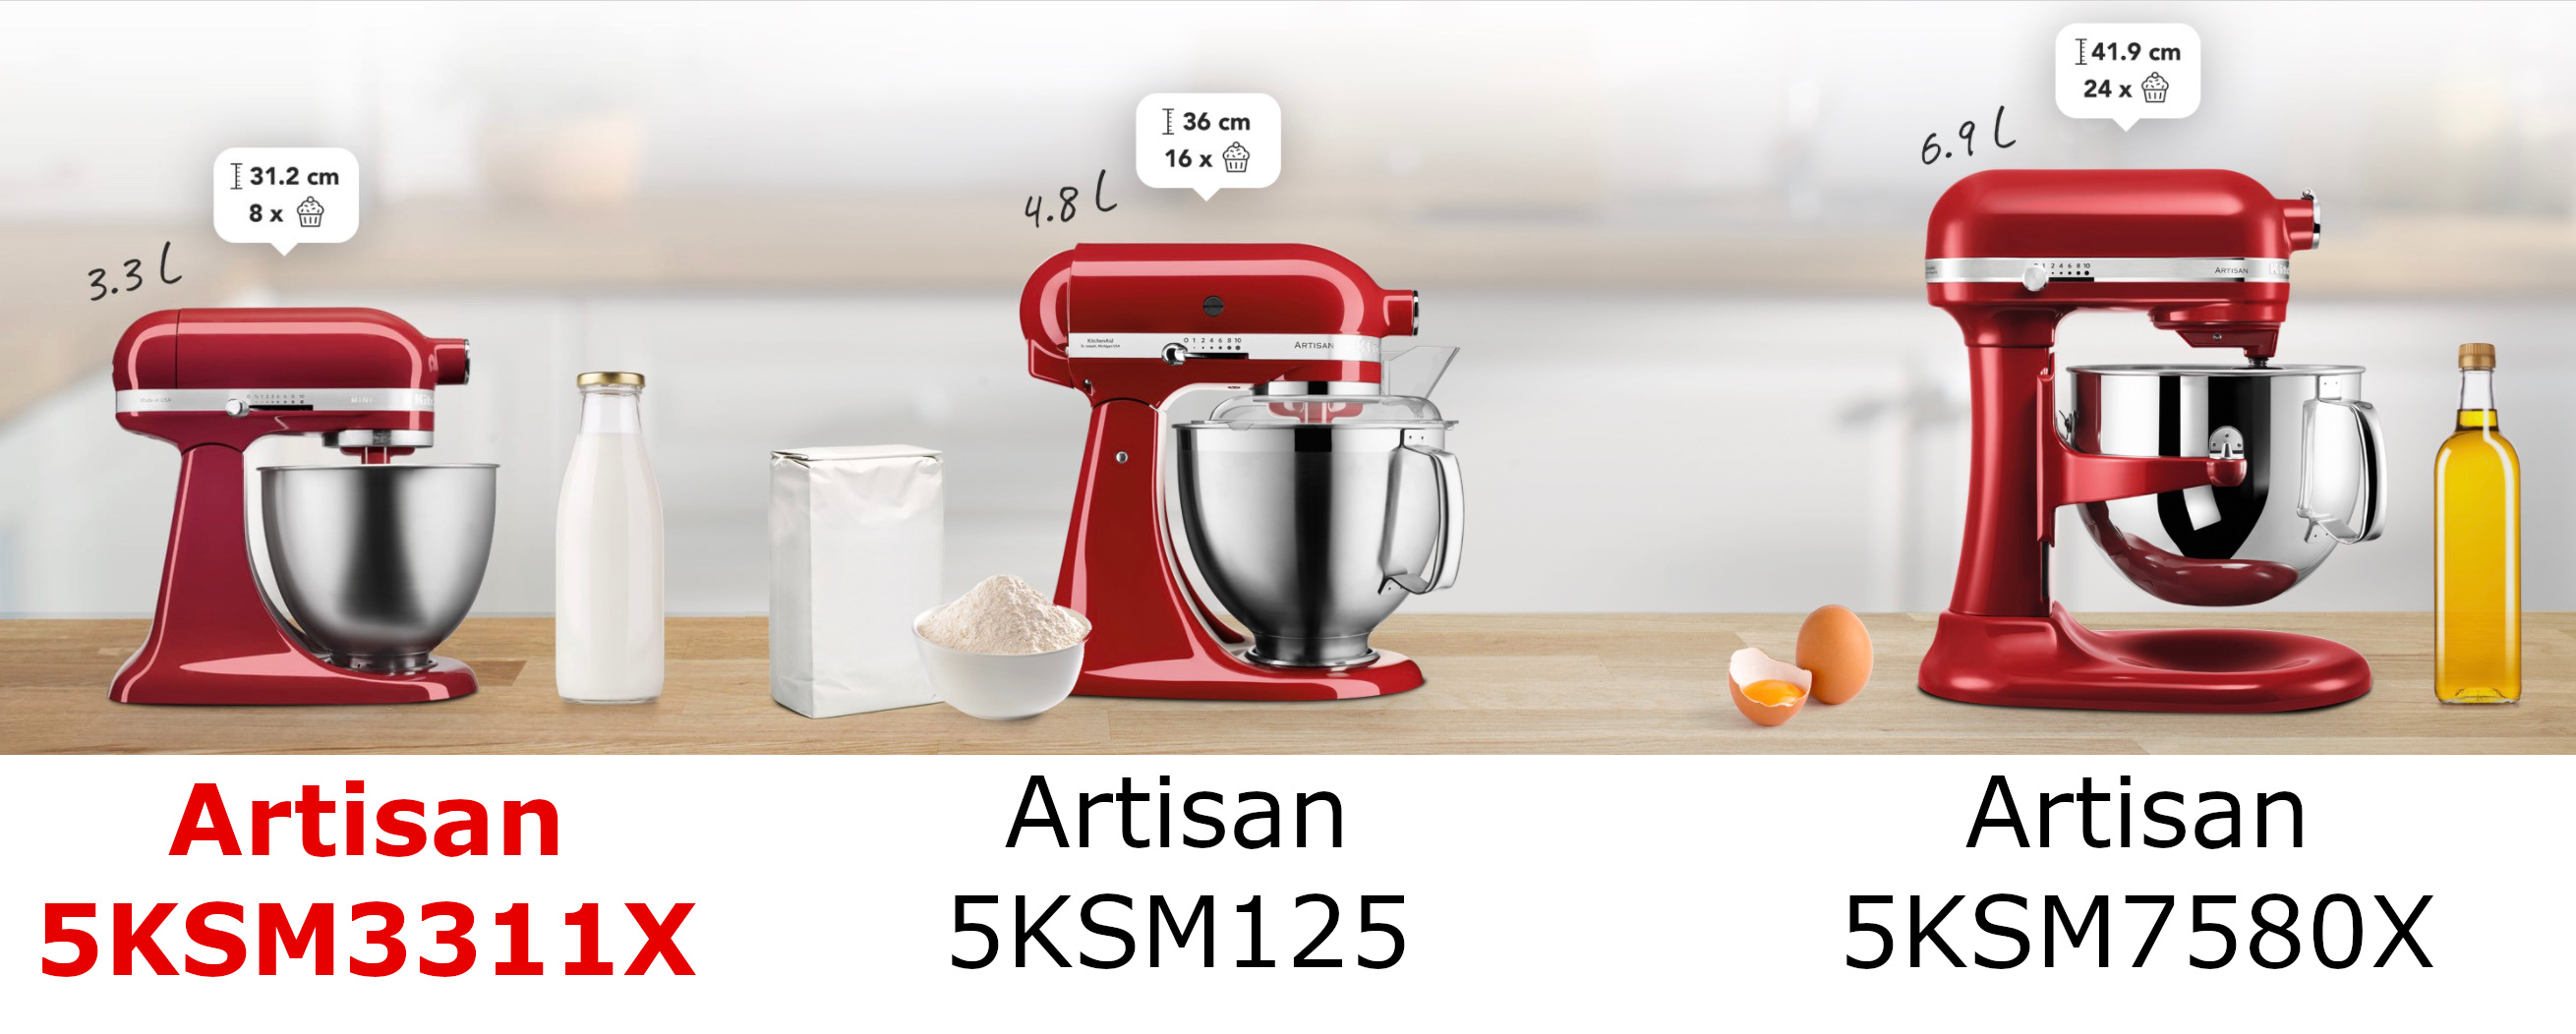 KitchenAid Artisan 5KSM3311X compared with other models